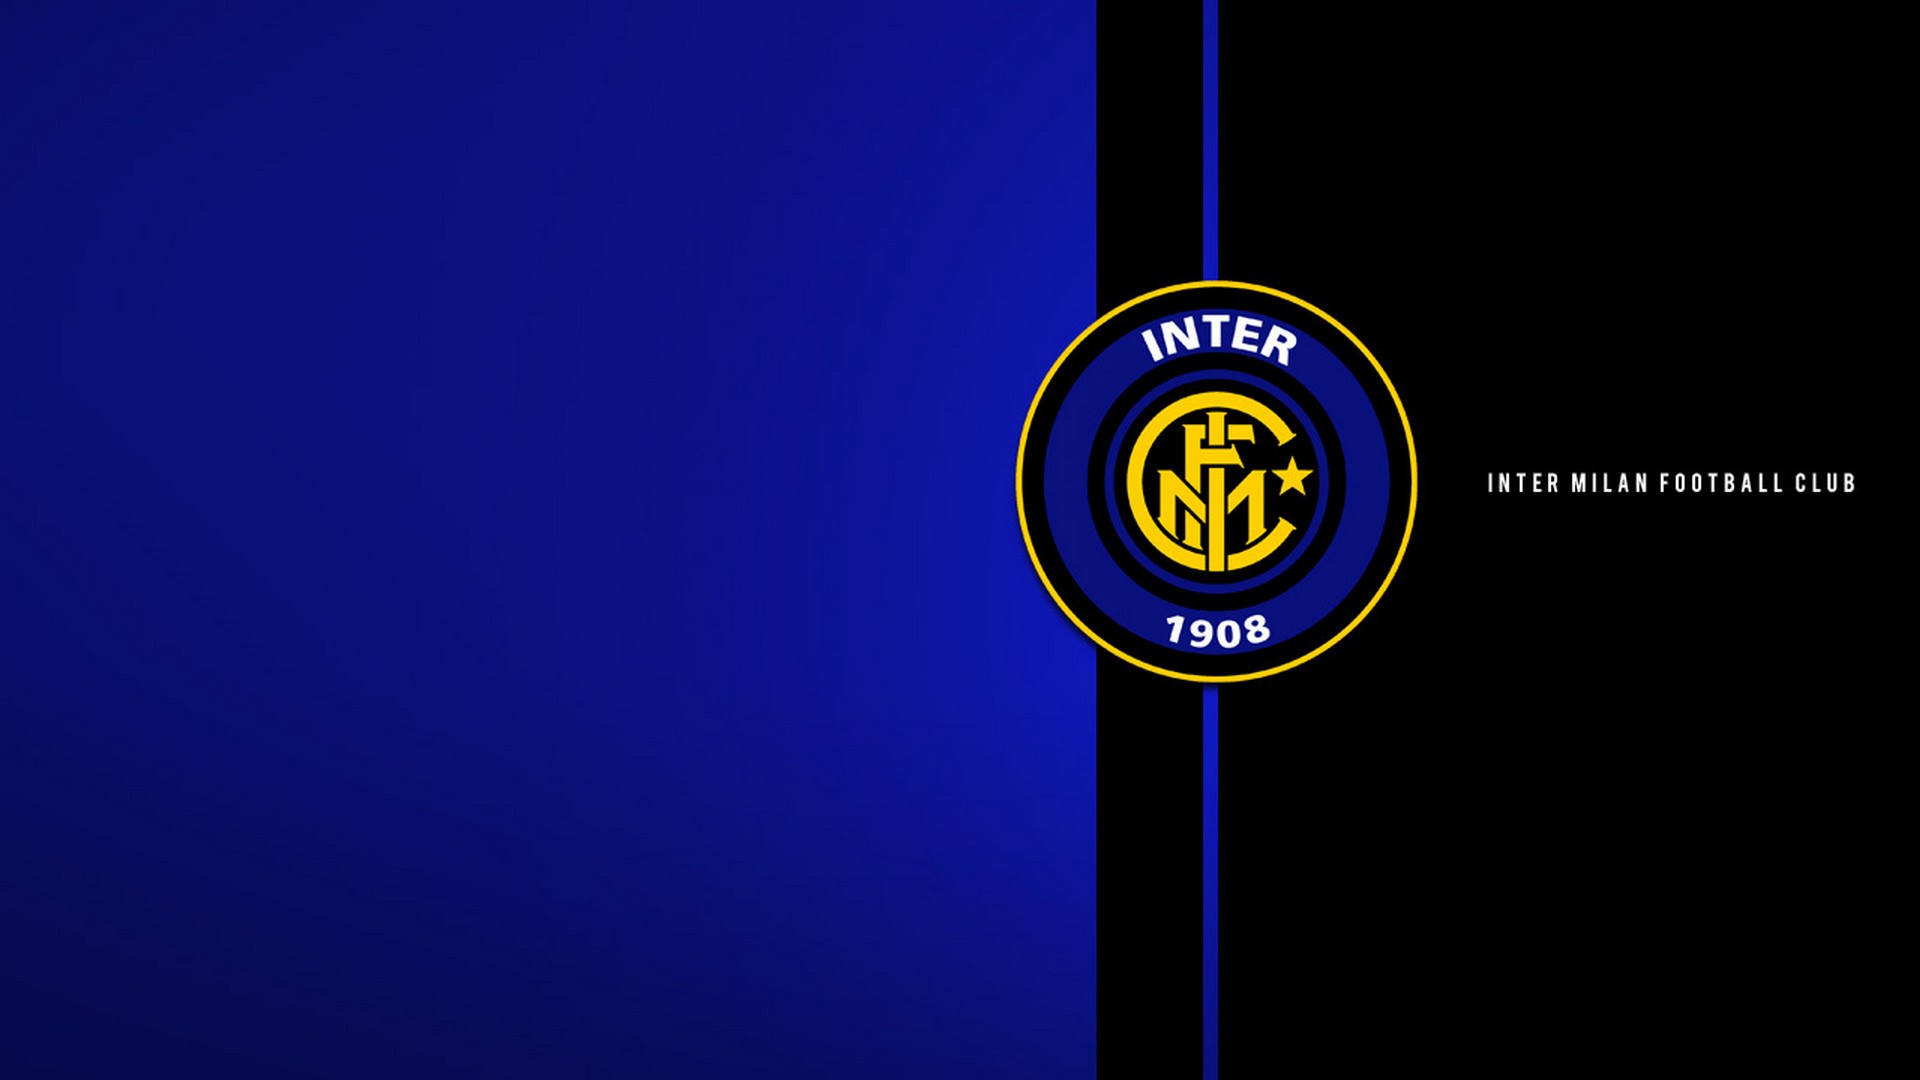 Inter Milan For Desktop Wallpaper with high-resolution 1920x1080 pixel. You can use this wallpaper for your Desktop Computers, Mac Screensavers, Windows Backgrounds, iPhone Wallpapers, Tablet or Android Lock screen and another Mobile device